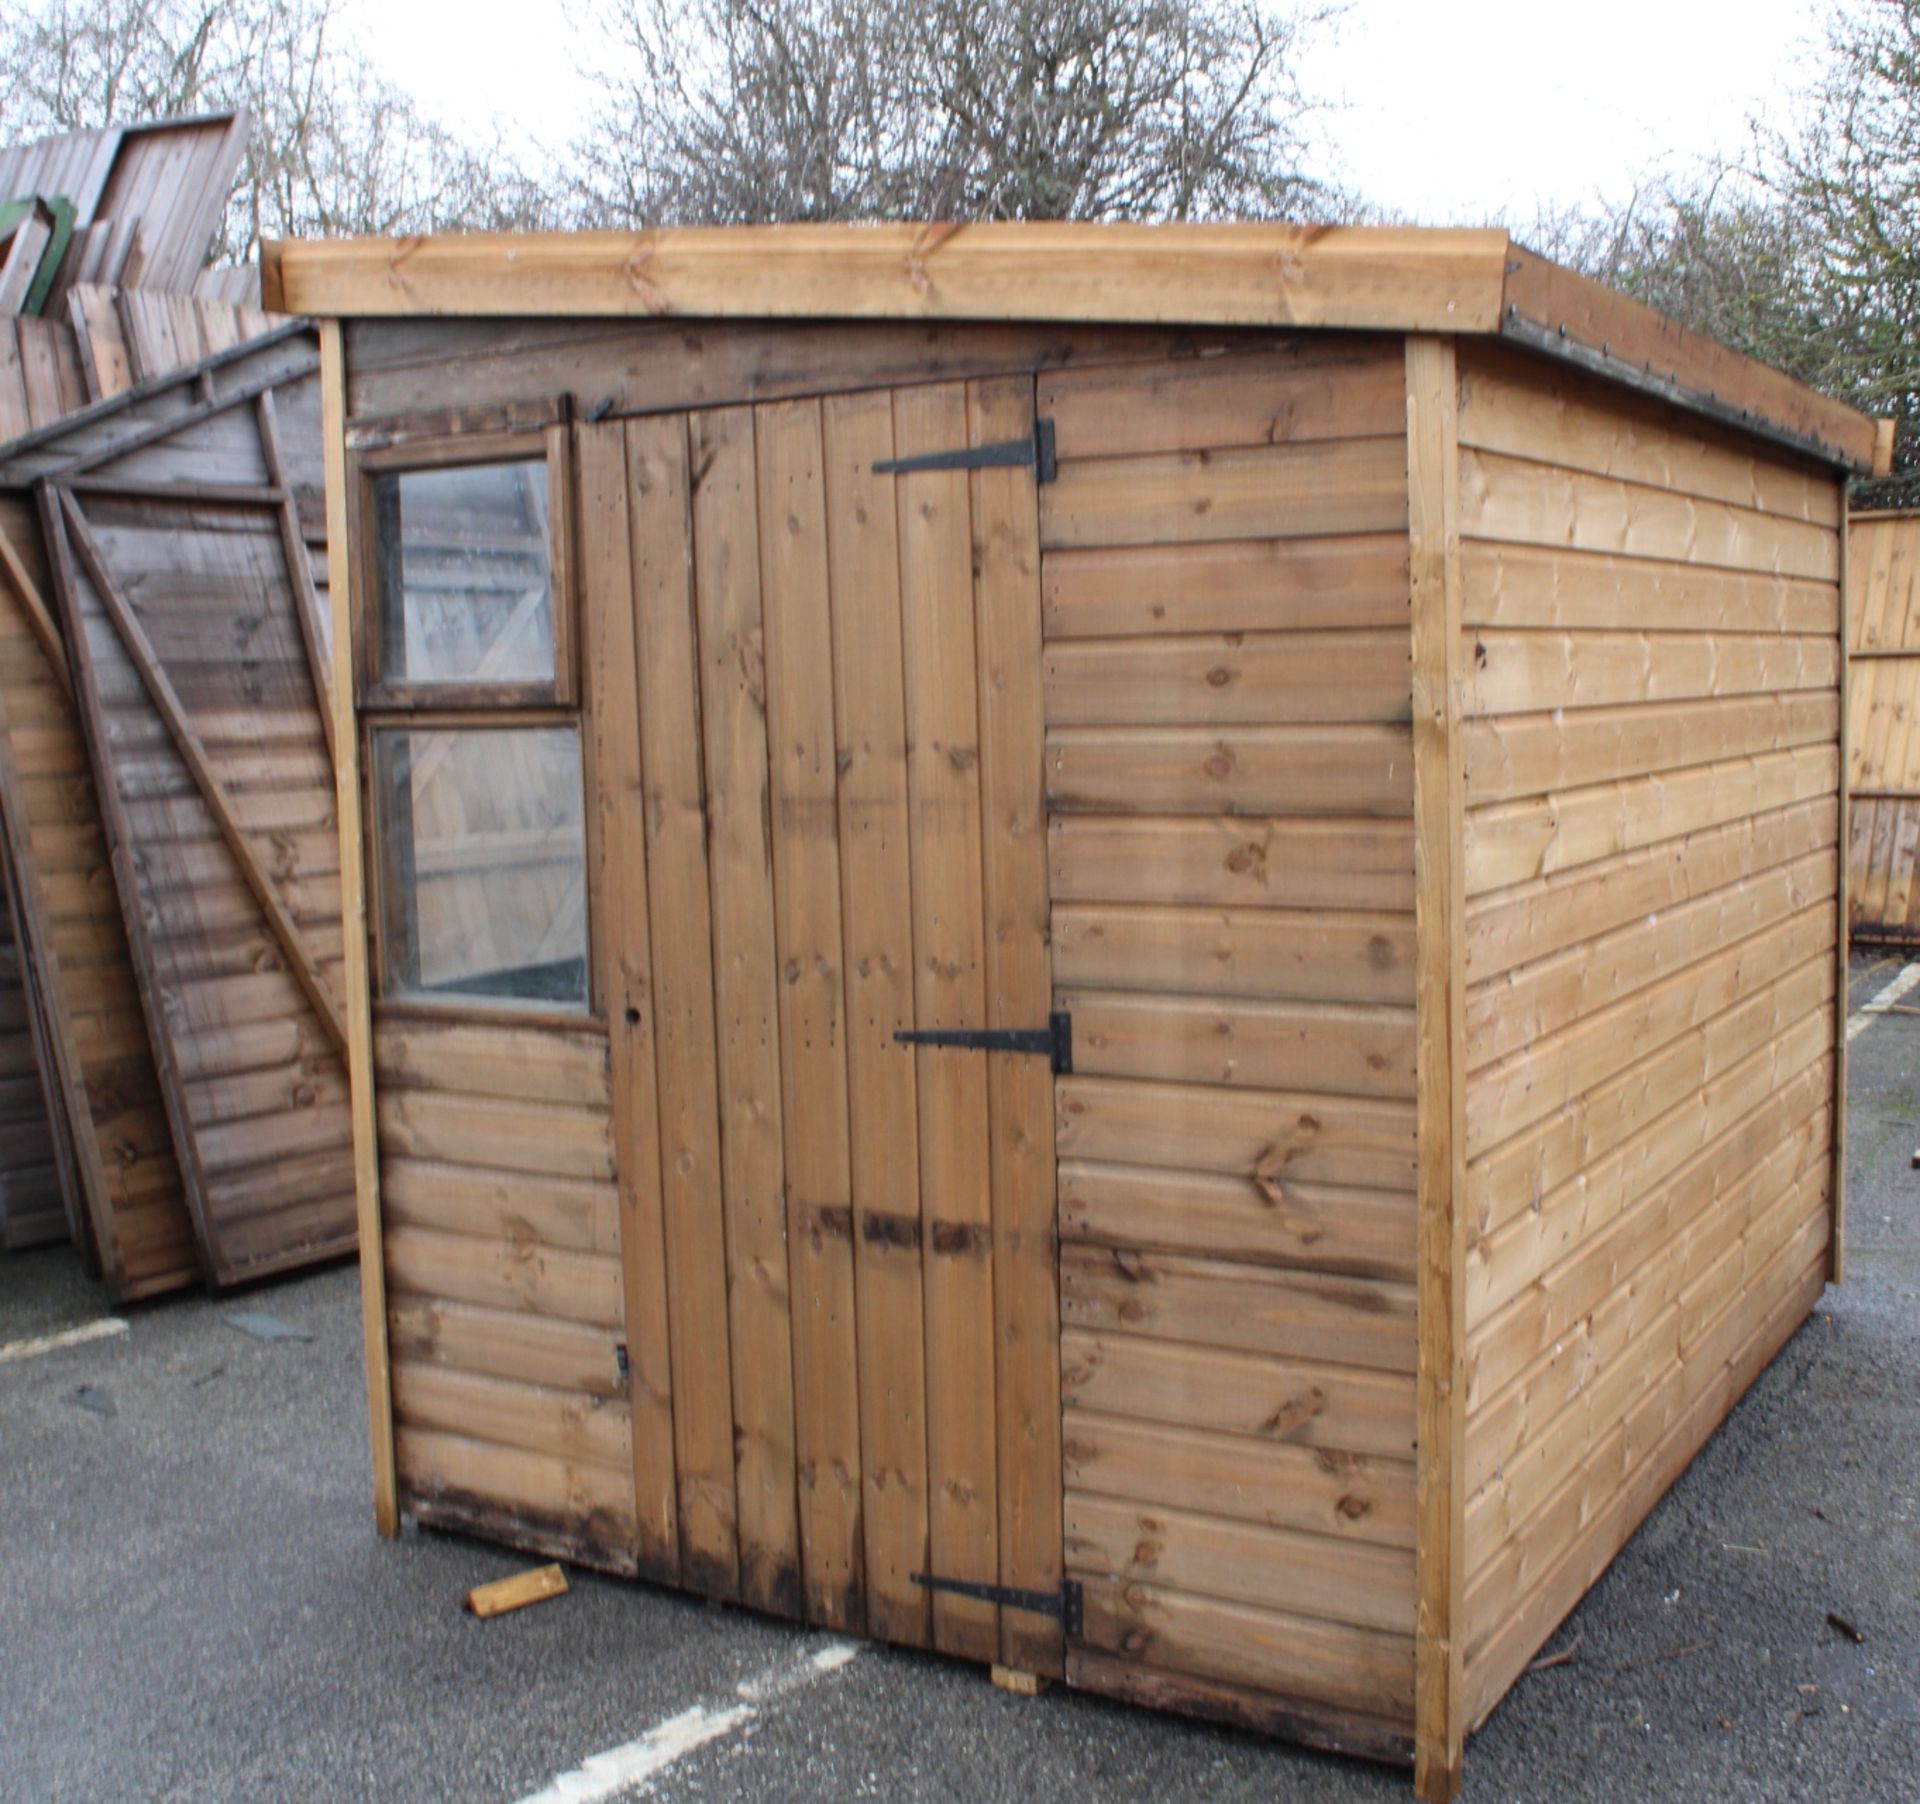 8x6 'sunflower' potting style shed, Standard 16mm Nominal Cladding - Image 3 of 3